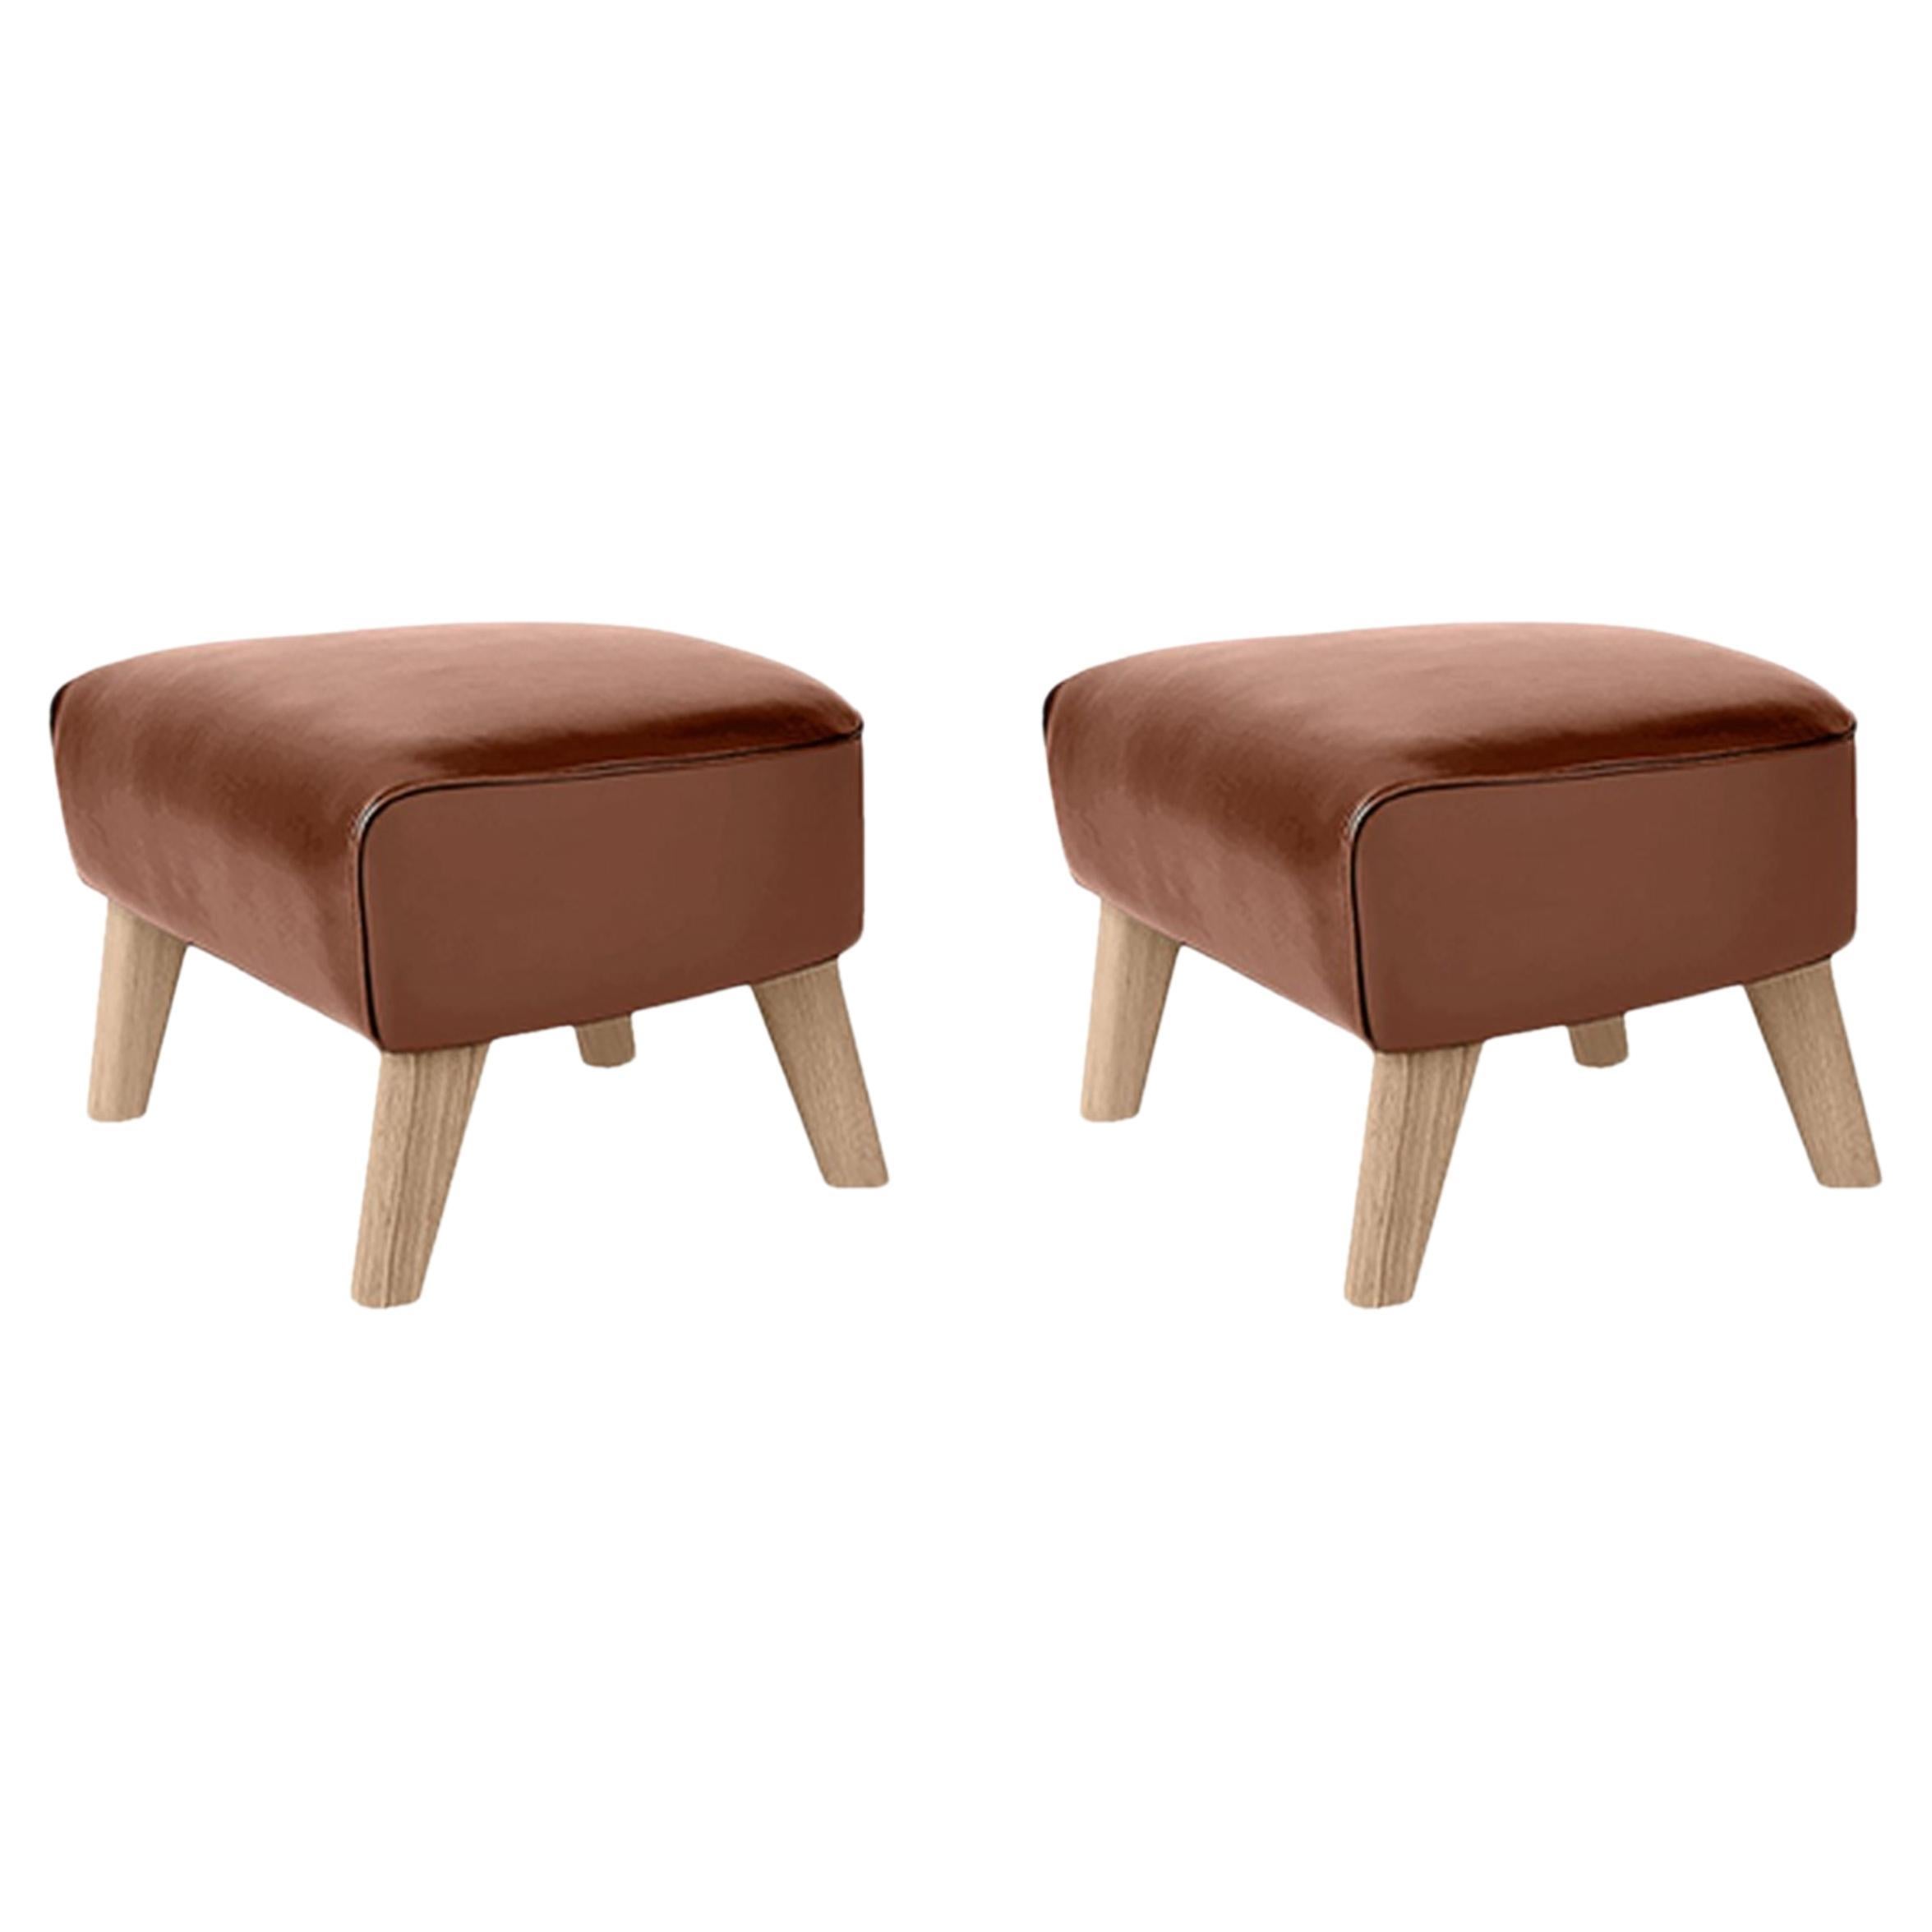 Set of 2 Brown Leather and Natural Oak My Own Chair Footstools by Lassen For Sale